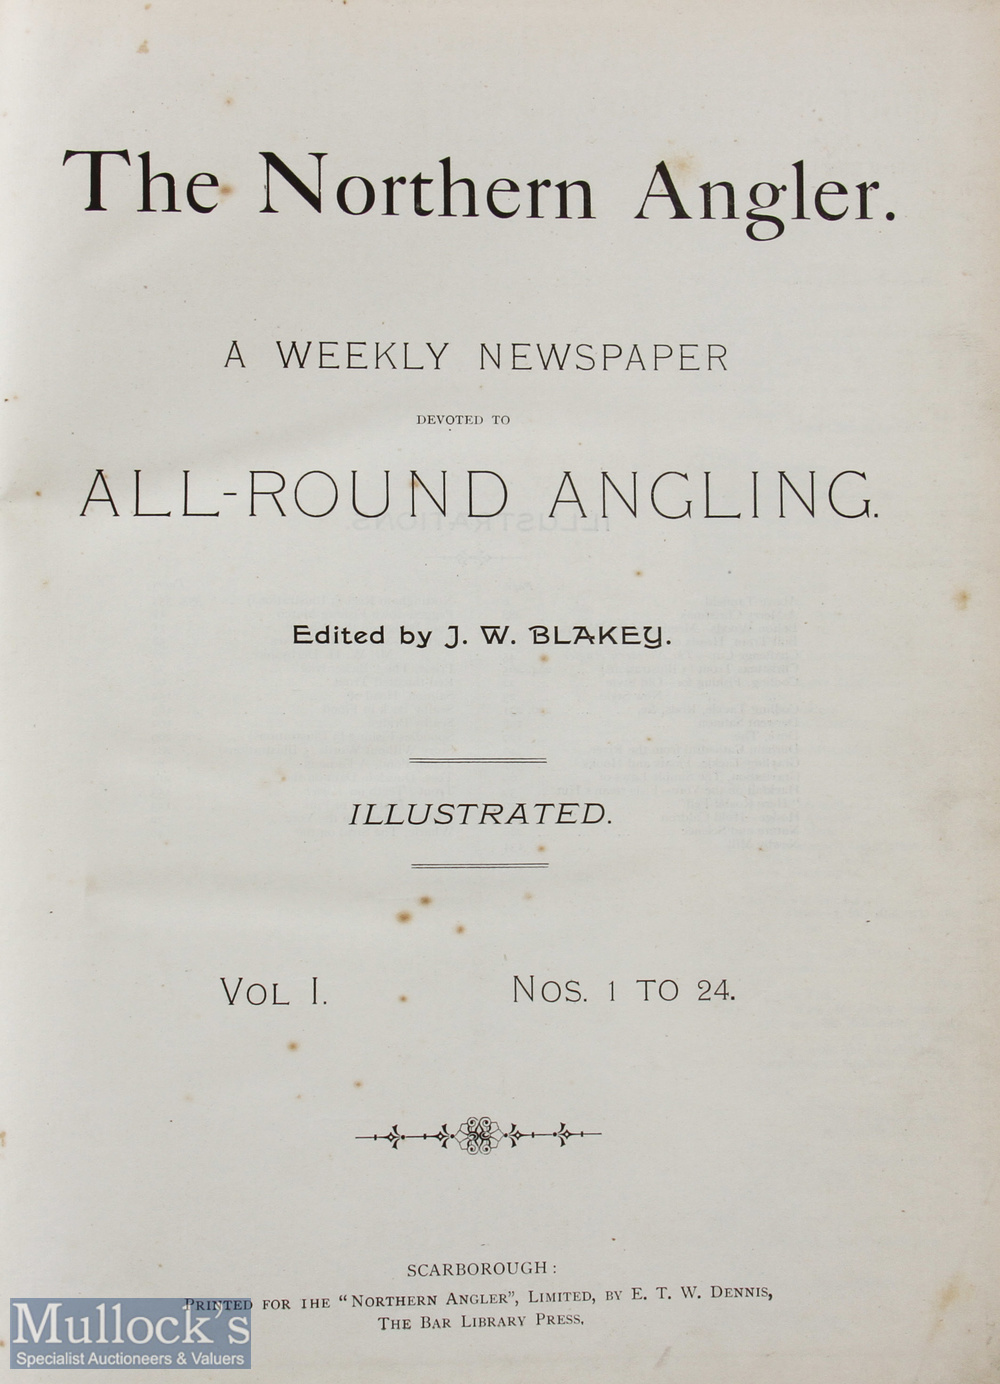 The Northern Angler 1892/93, a weekly newspaper, All Round Angler J W Blakey Vol 1 Nos 1-24, bound - Image 2 of 2